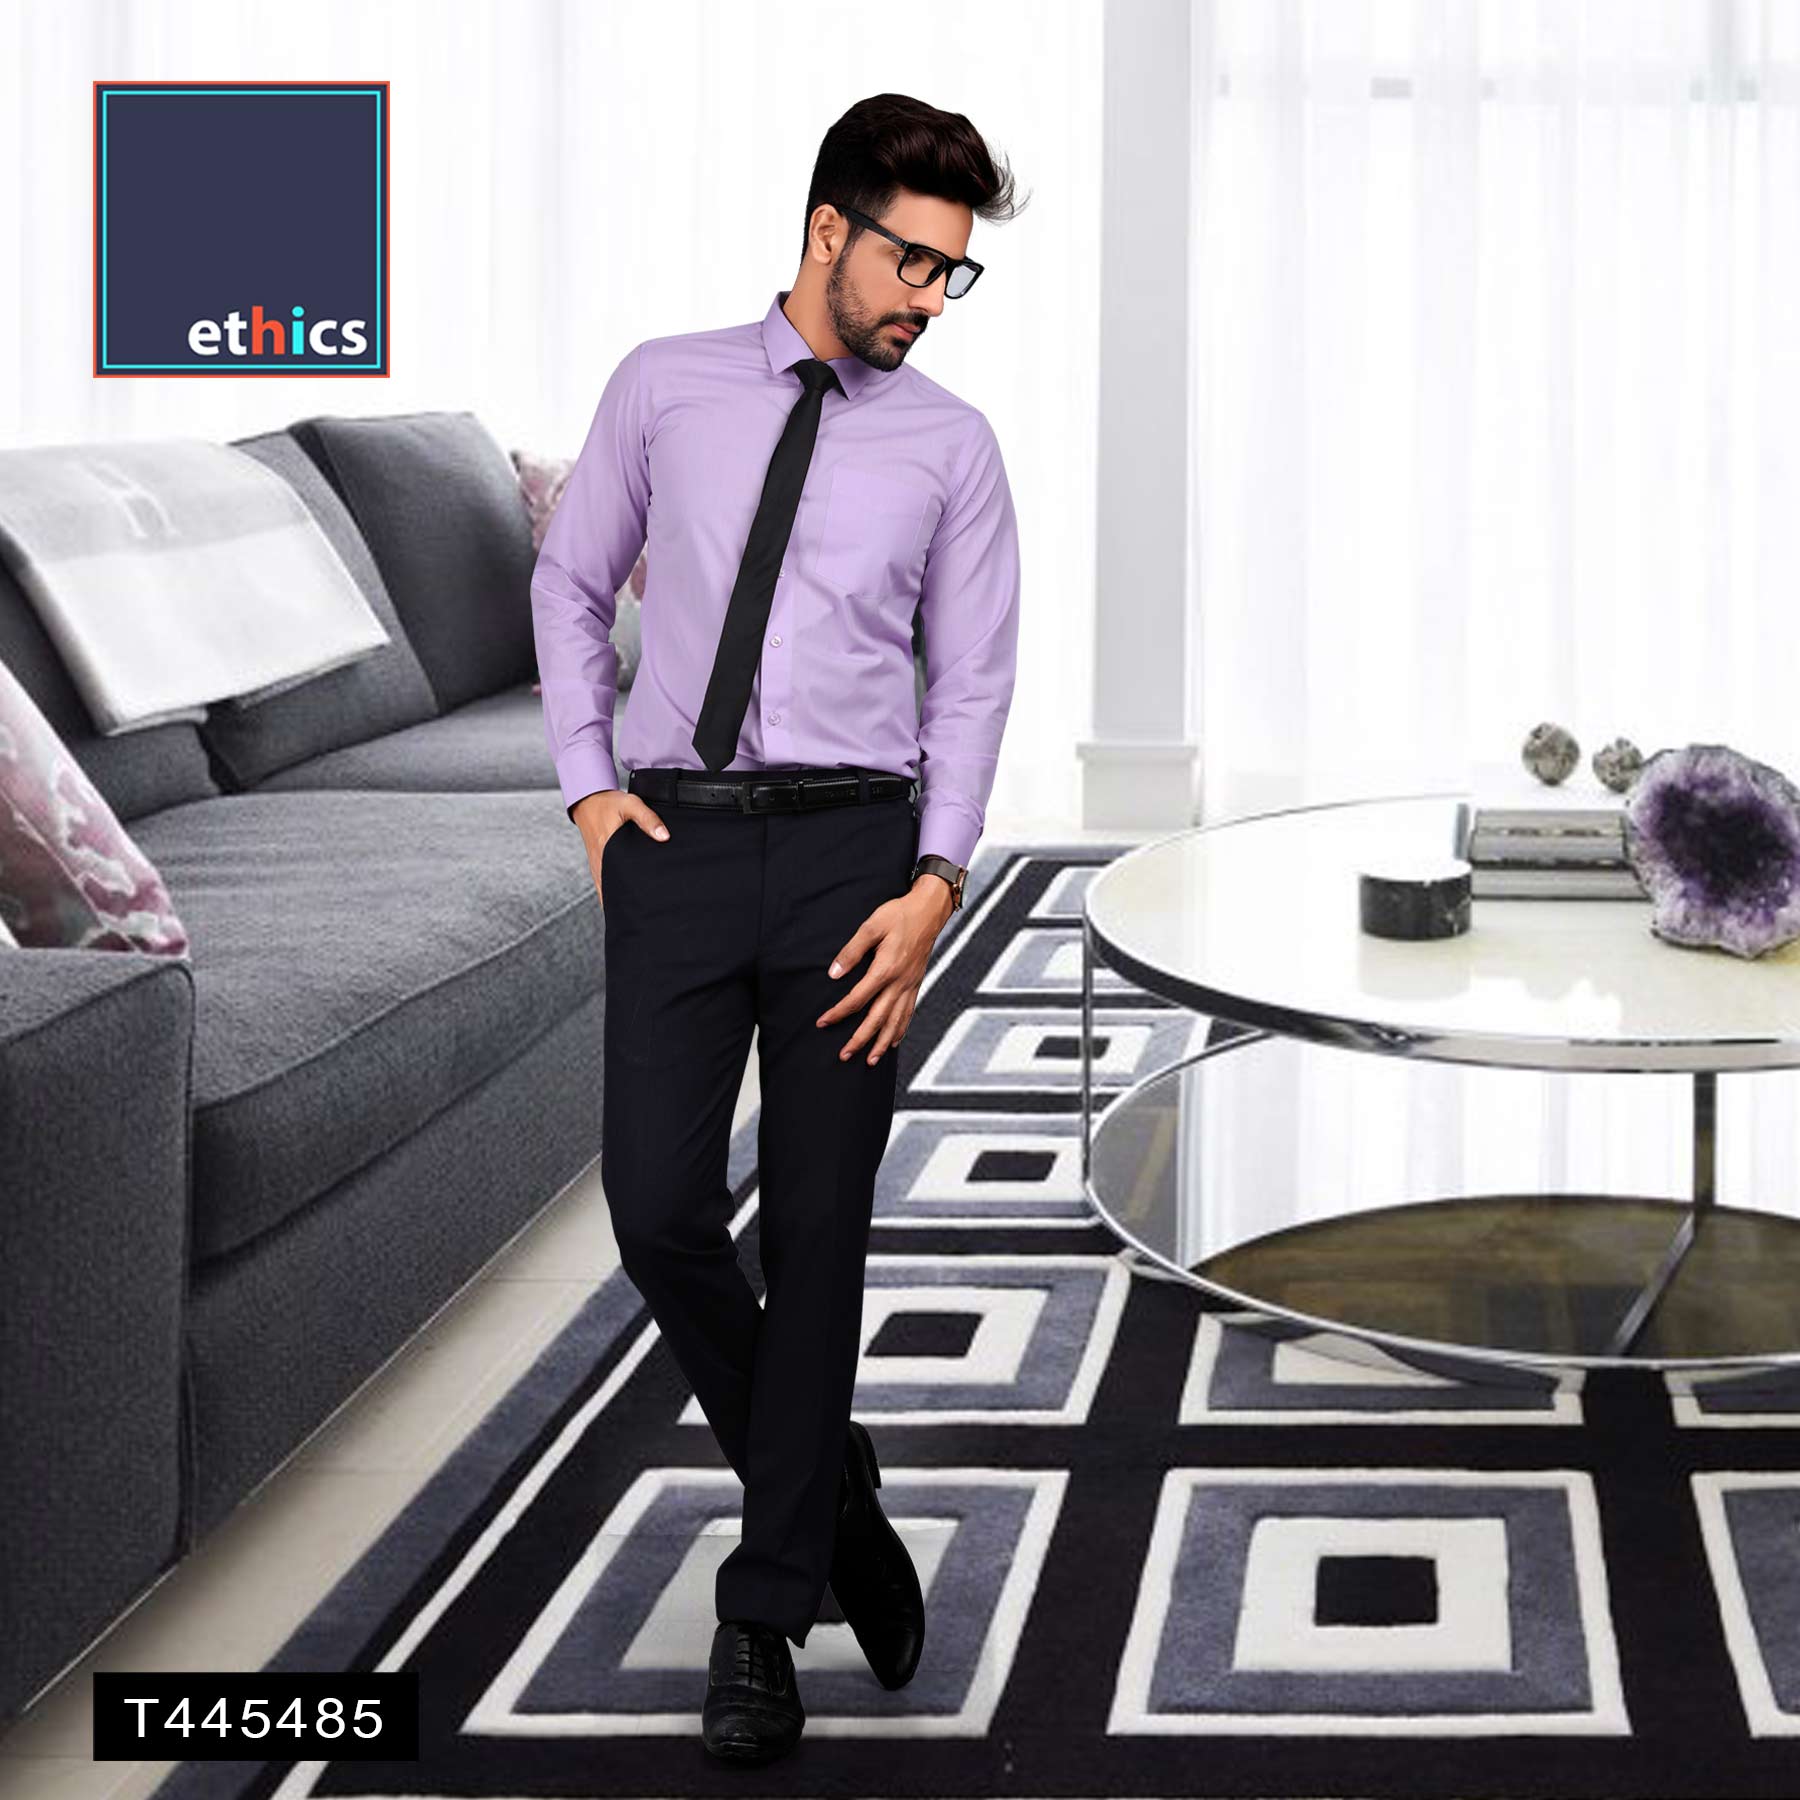 10 Best What Color Tie With Black Pants And Maroon Shirt Collection  Mens  blue dress shirt Men fashion casual shirts Shirt outfit men